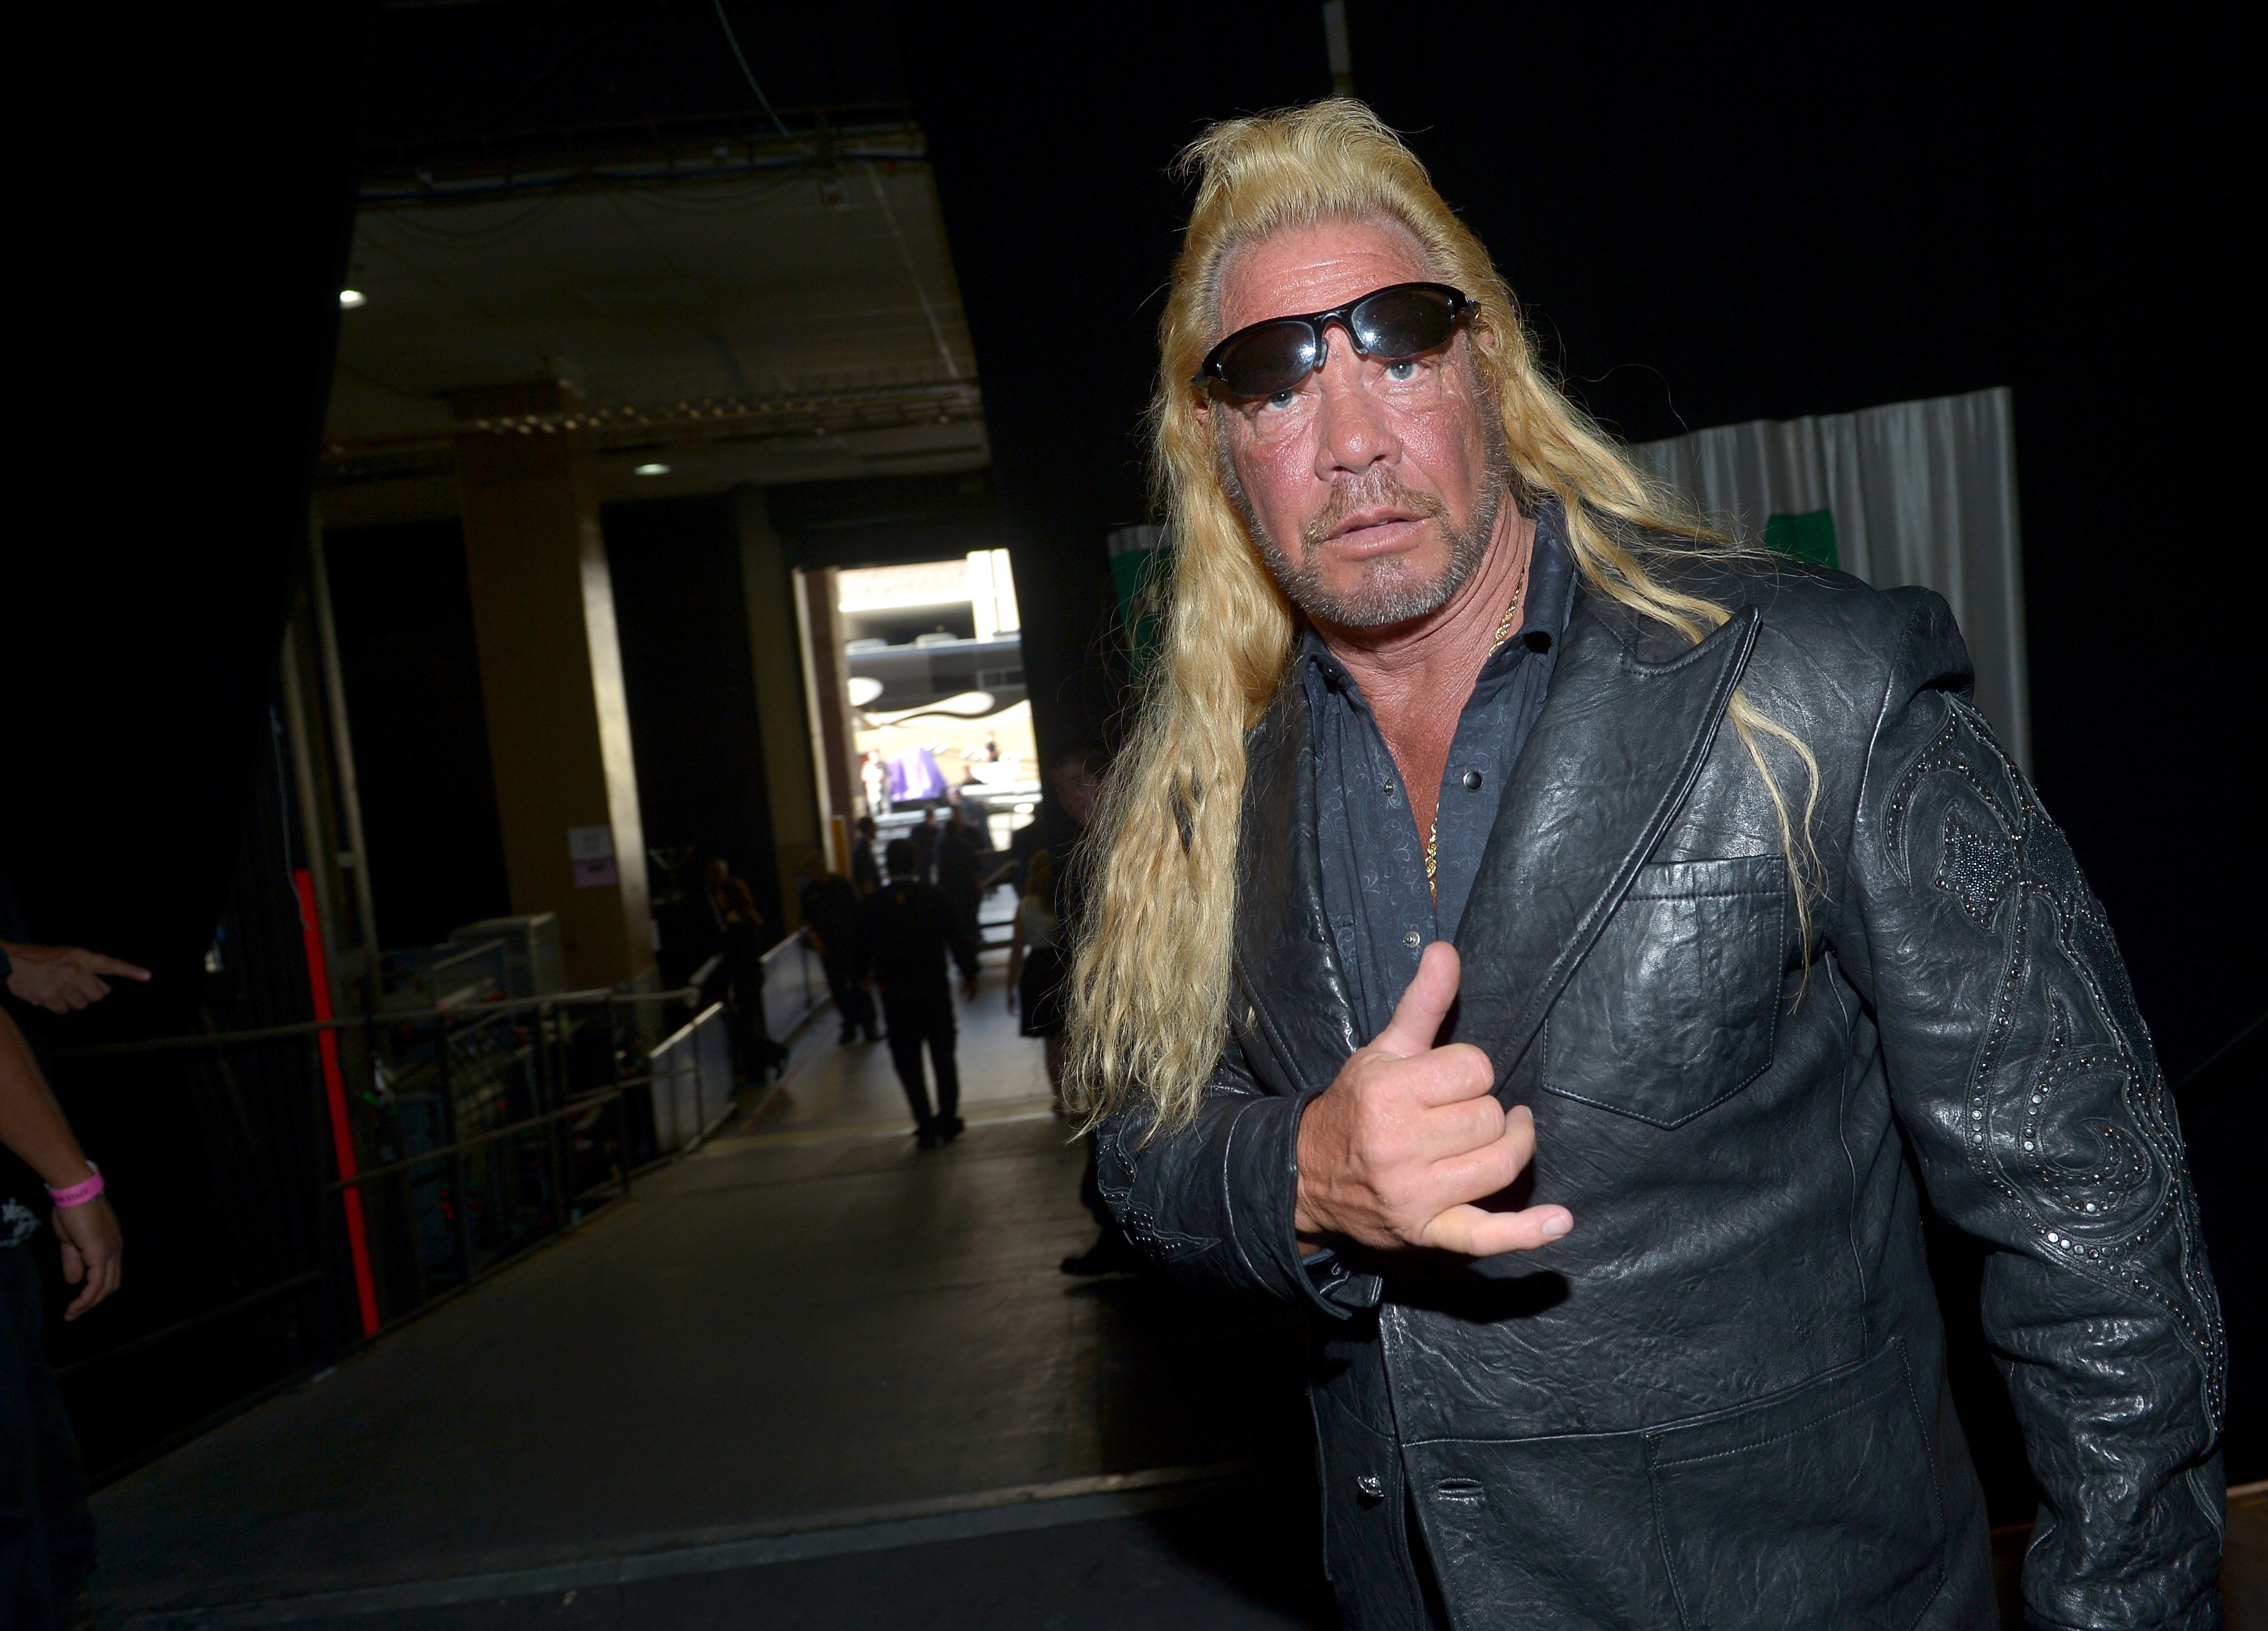 Dog the Bounty Hunter attends the 48th Annual Academy of Country Music Awards at the MGM Grand Garden Arena on April 7, 2013 in Las Vegas, Nevada. | Photo: GettyImages